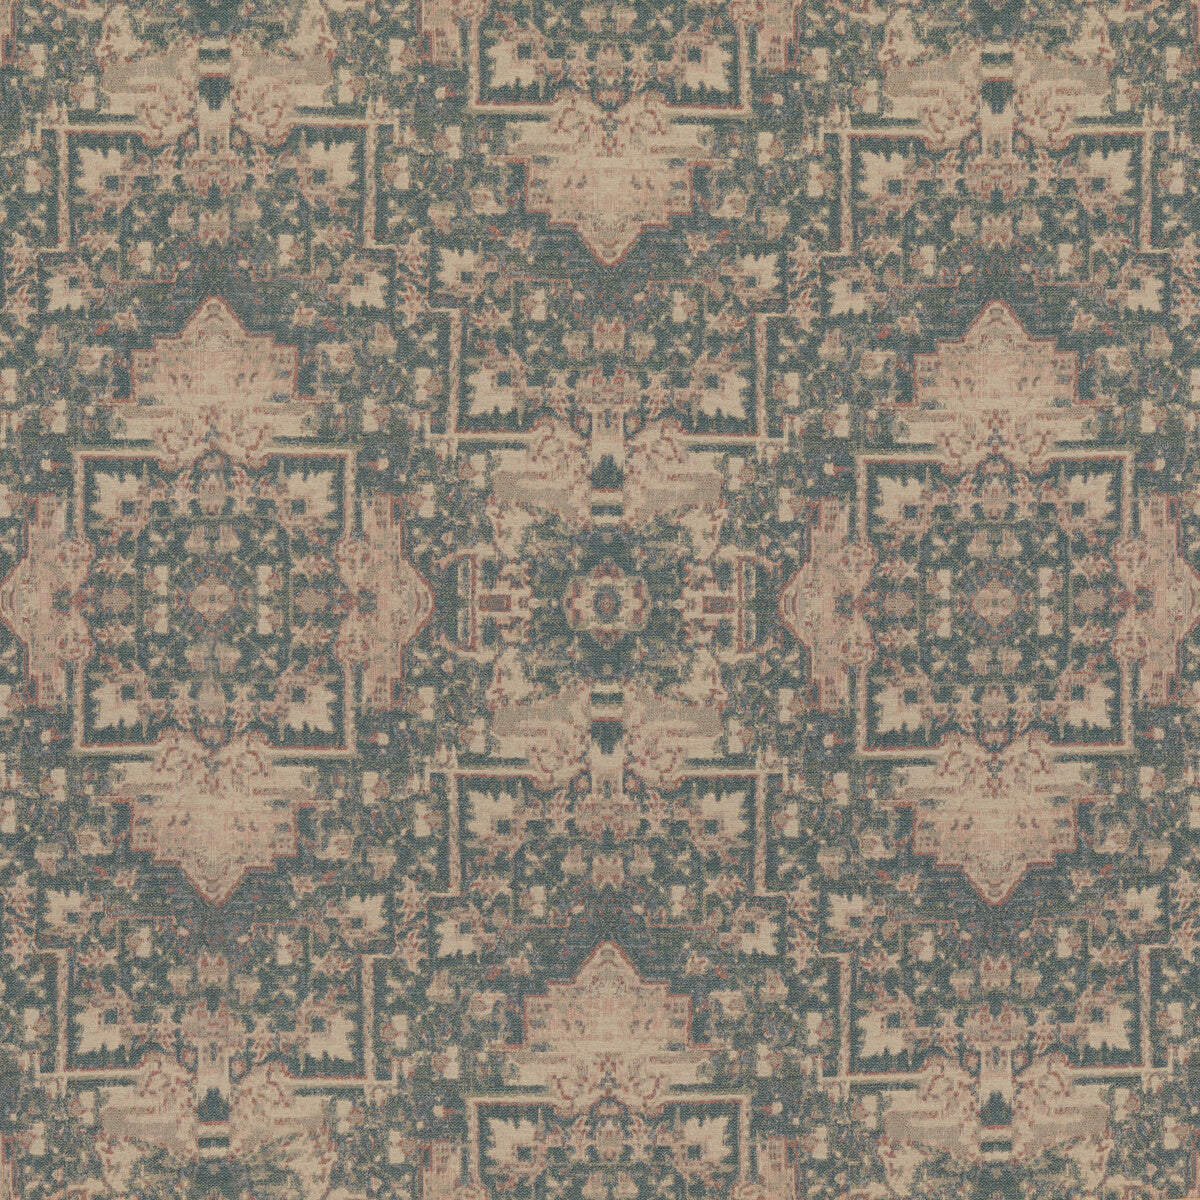 Faded Tapestry fabric in blue/stone color - pattern FD782.G16.0 - by Mulberry in the Modern Country I collection